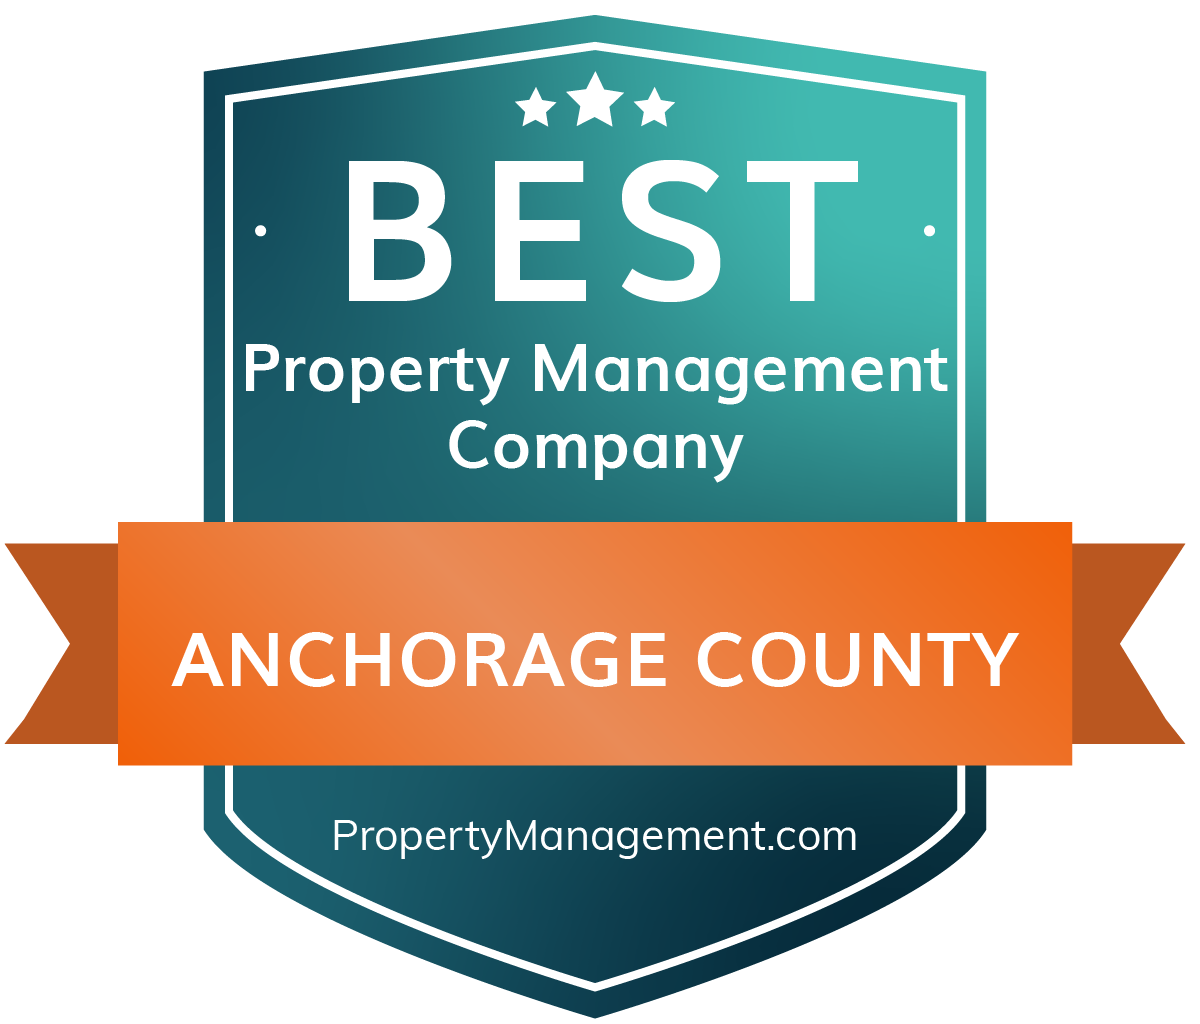 The Best Property Management Companies in Anchorage County, Alaska of 2022